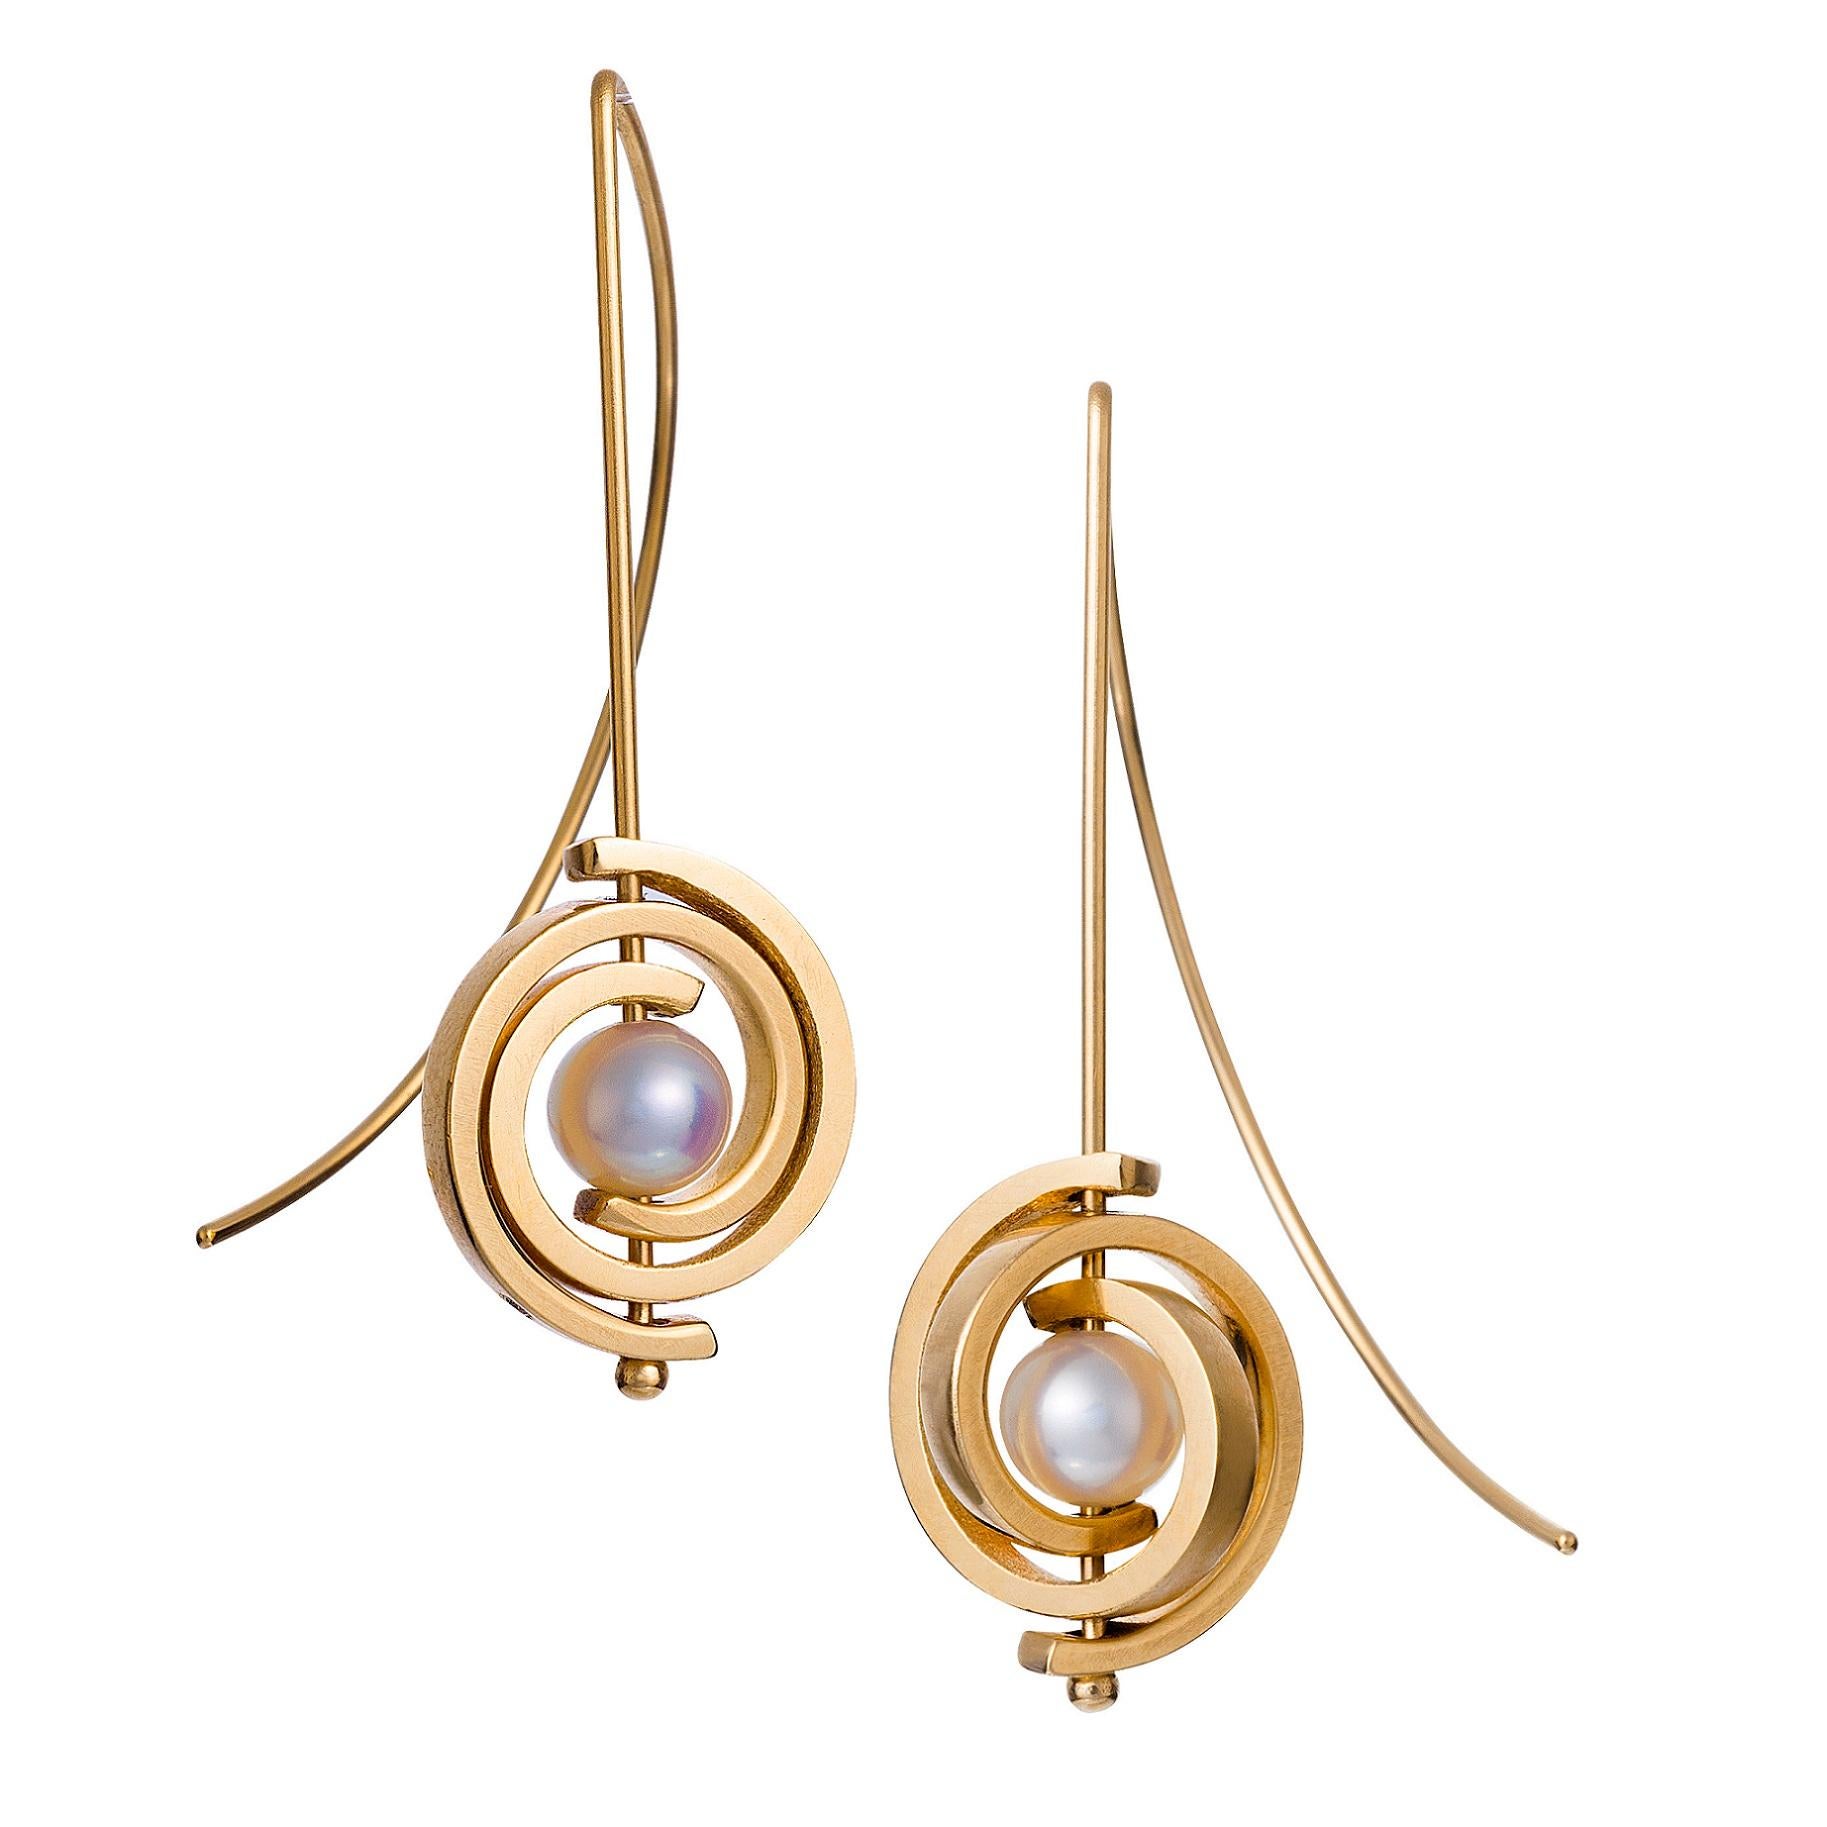 These  dangle pearl earrings with Tahitian pearls are from the Orbit collection. They are Medium Spiral Dangle Earrings with gold spirals, and a 20 gauge ear wire. The black Tahitian round pearls replace the usual white Akoya pearls, giving an